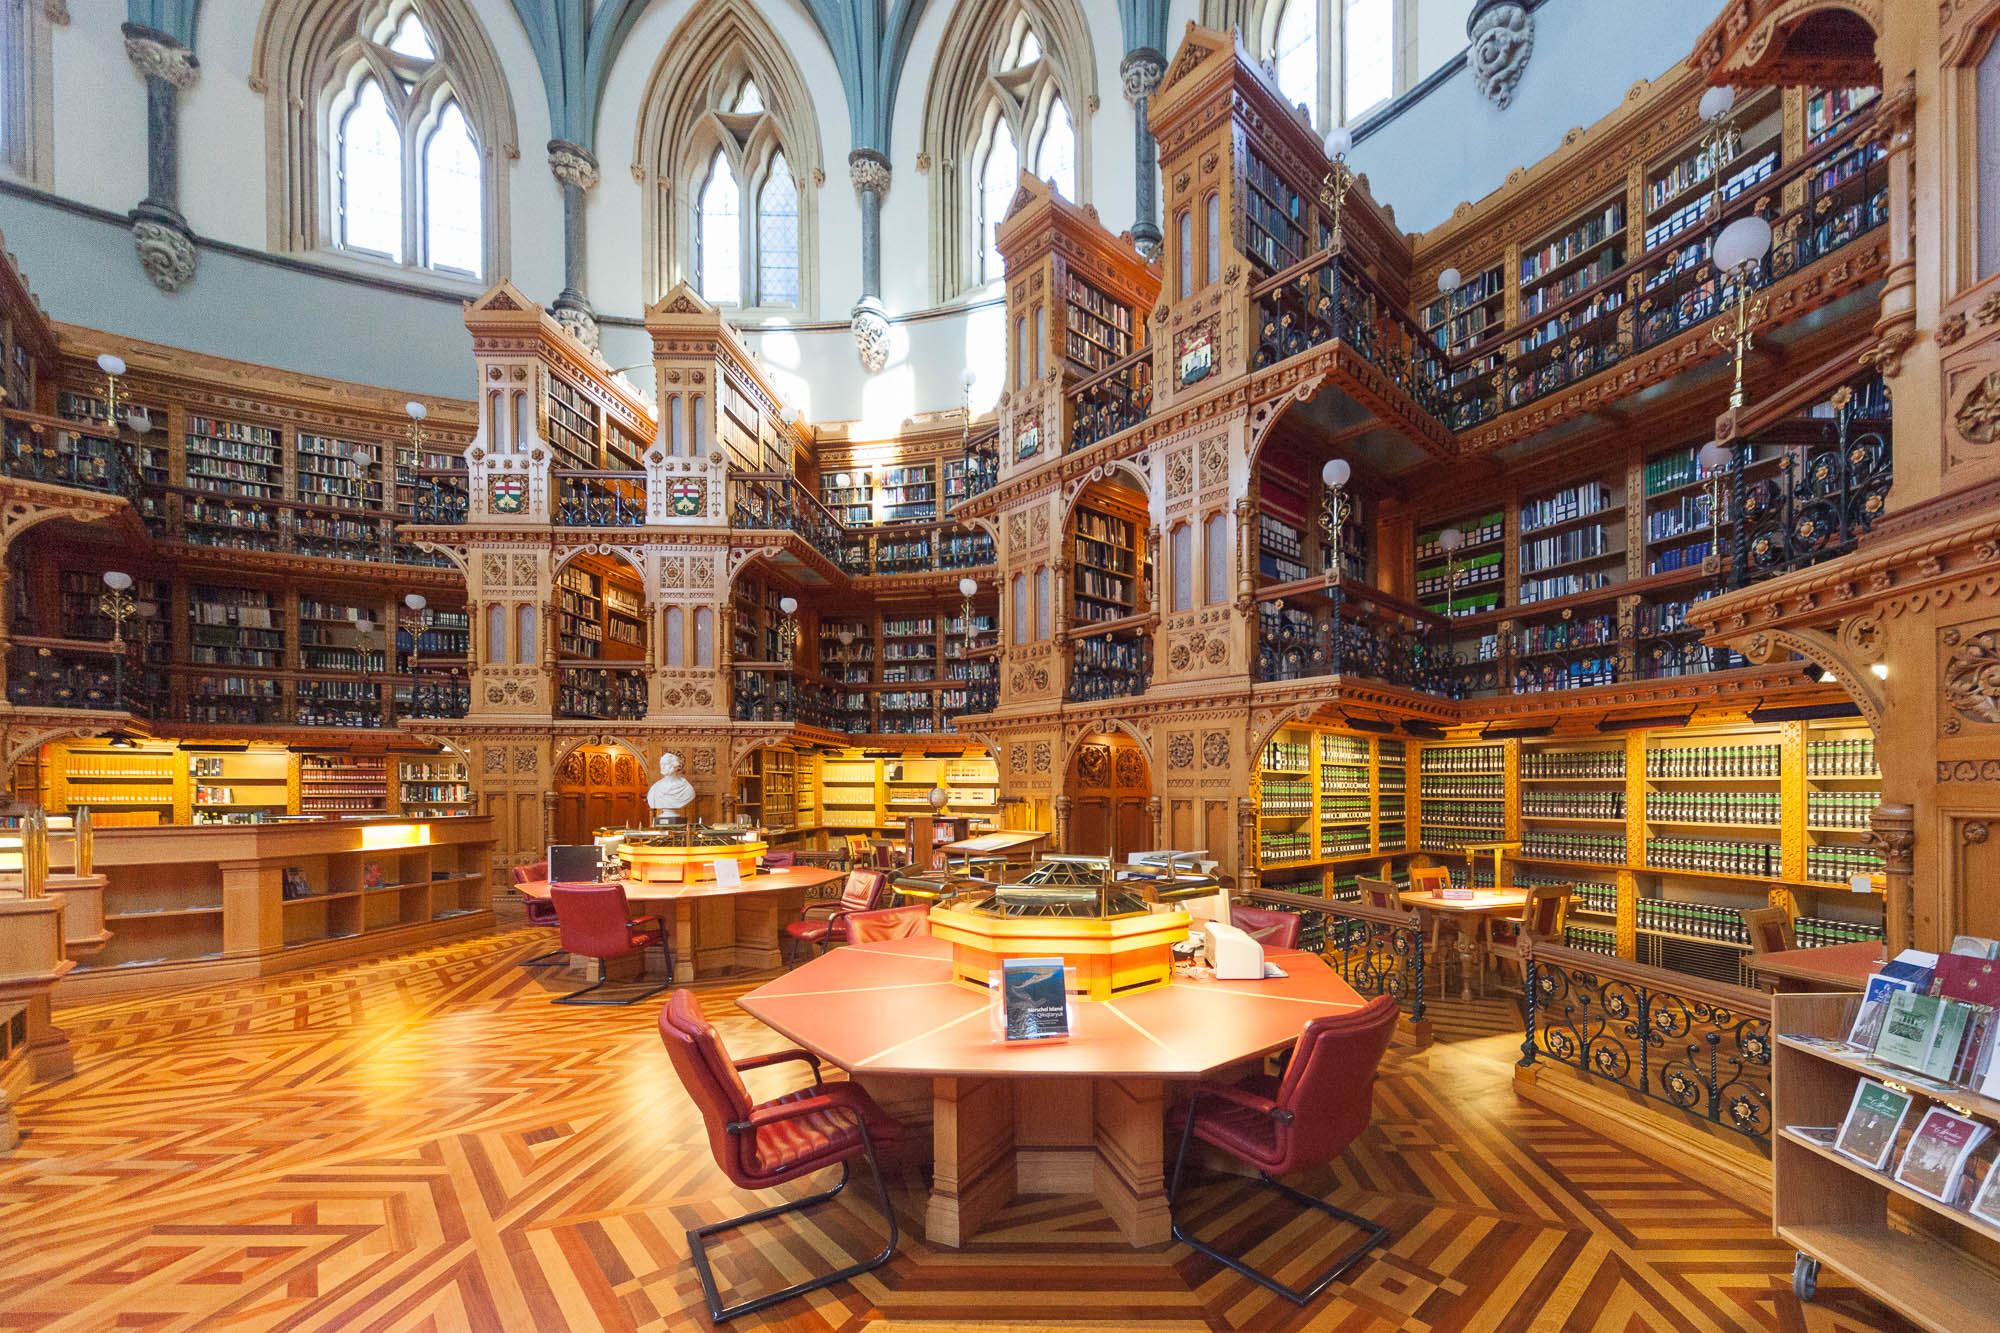 Image of the Library of Parliament in Canada, a neogothic building with tall wooden bookshelves.